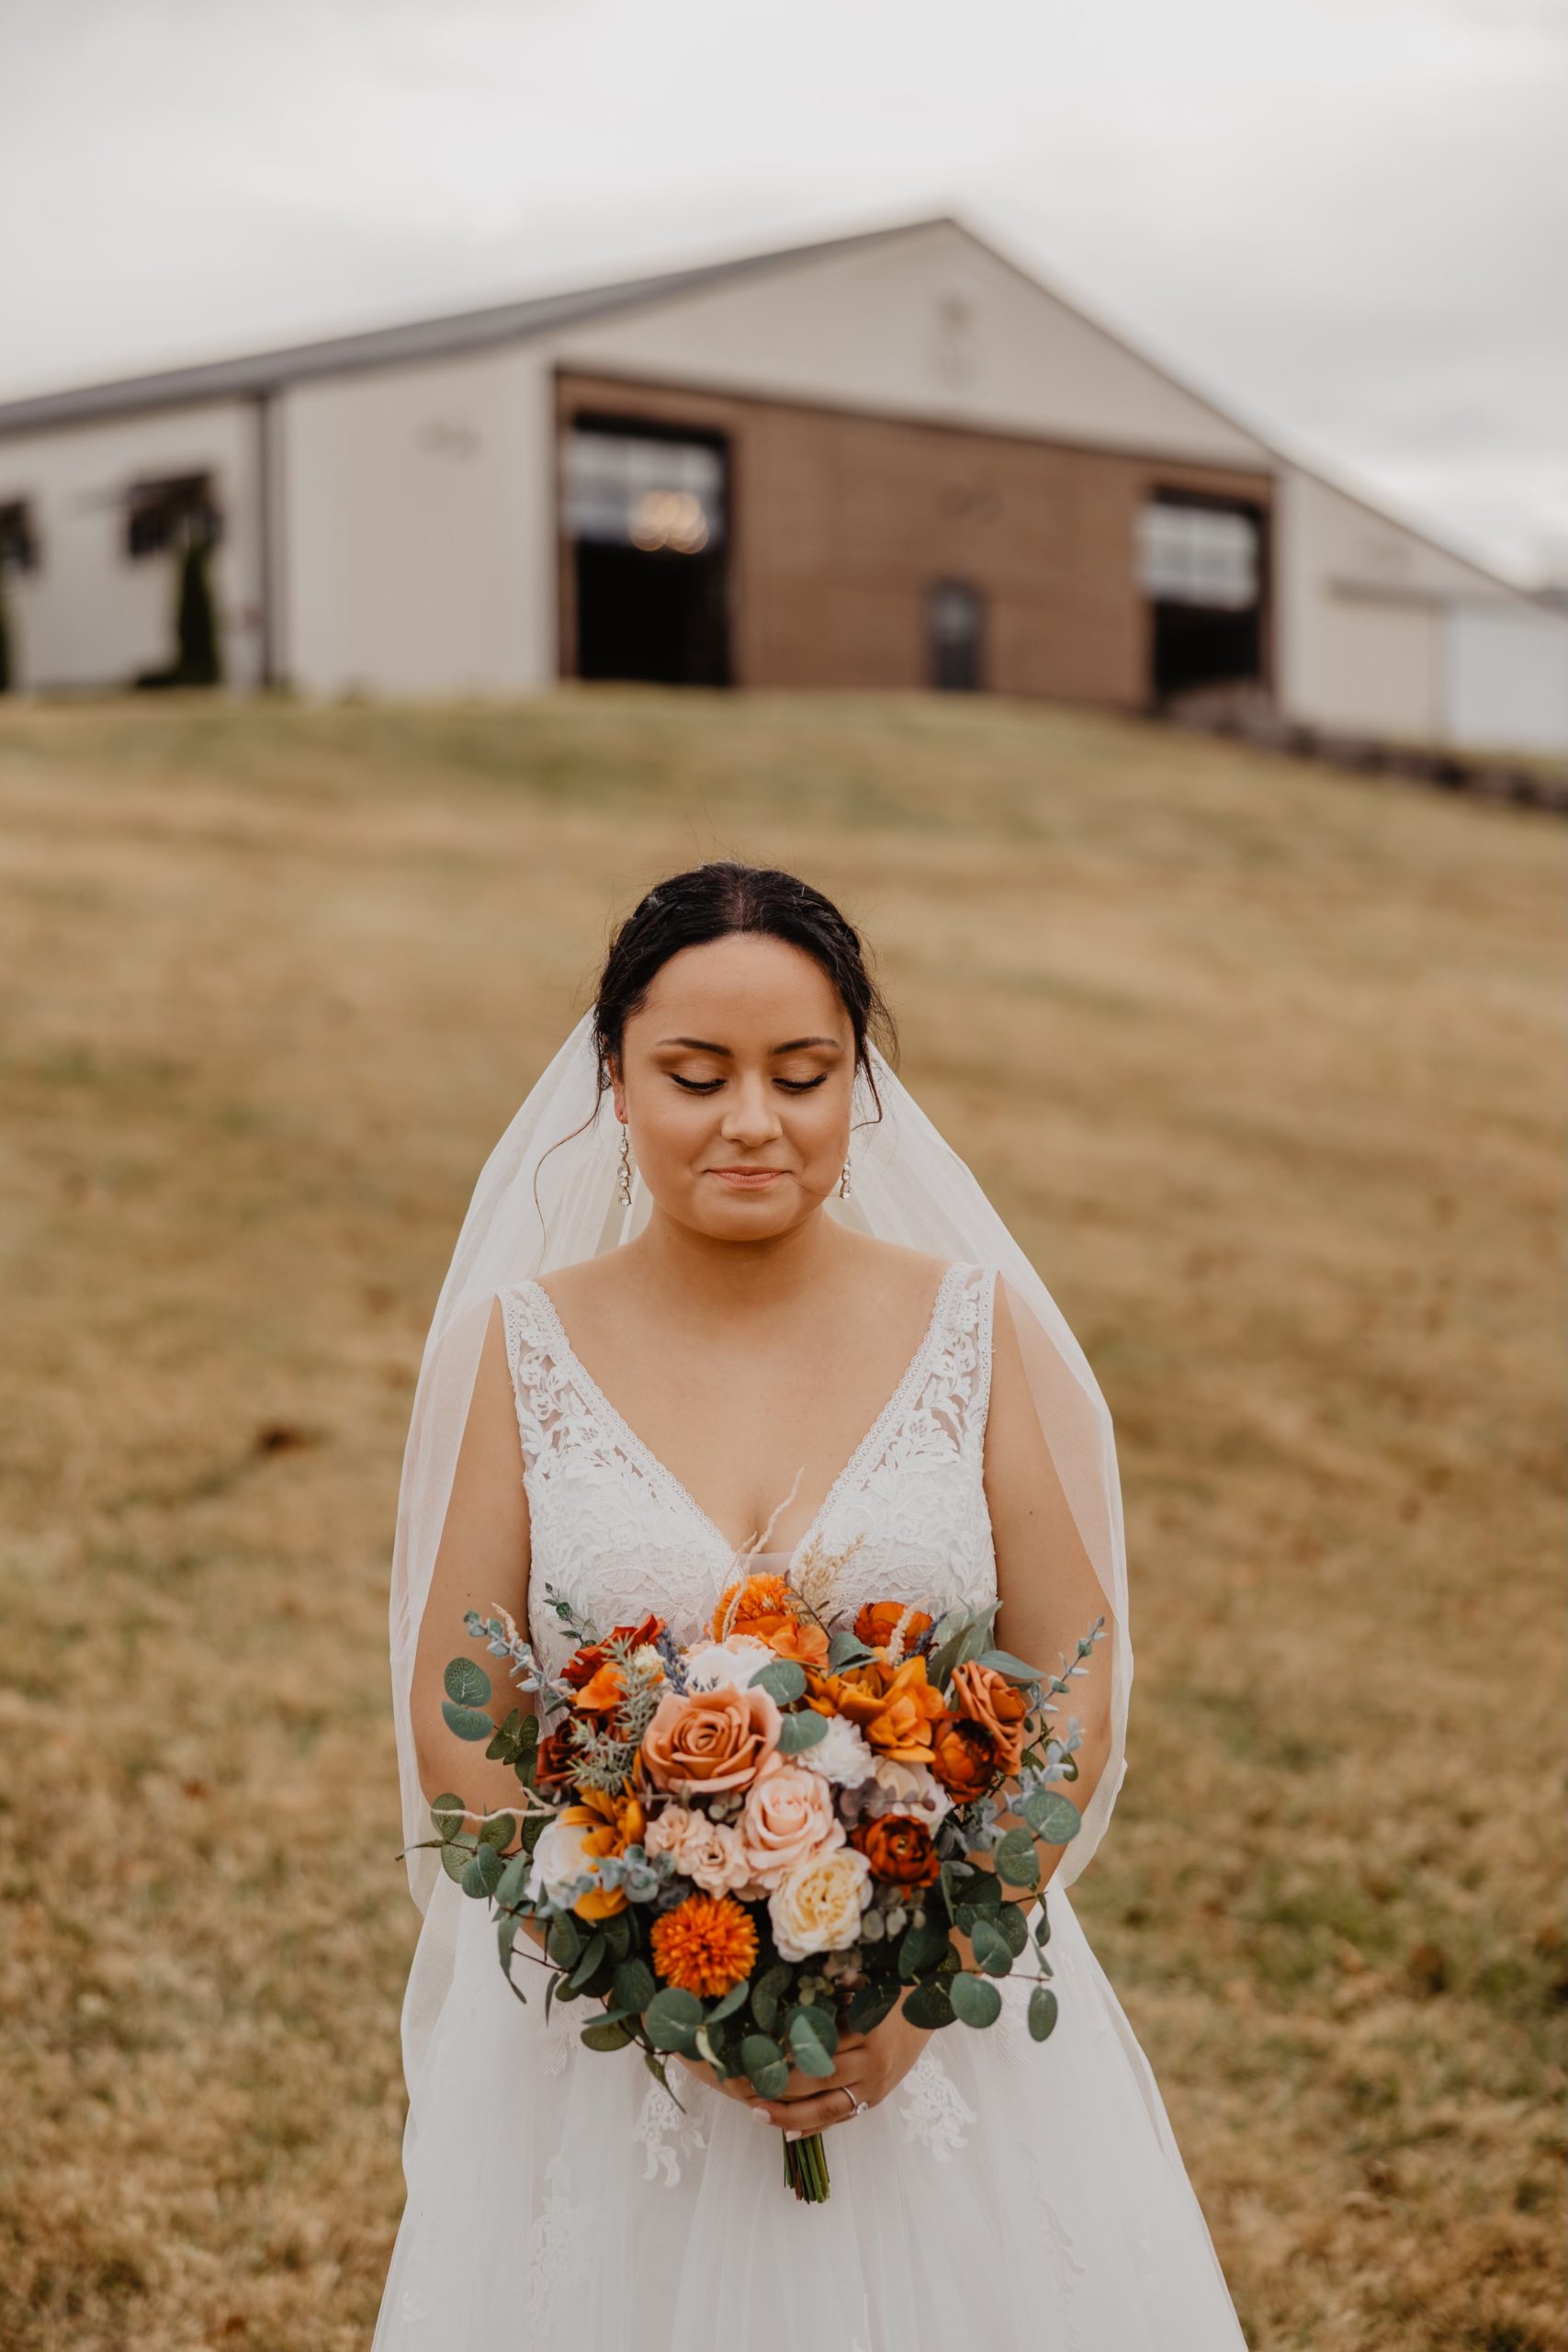 bridal portraits | My All-time favorite photography accessories